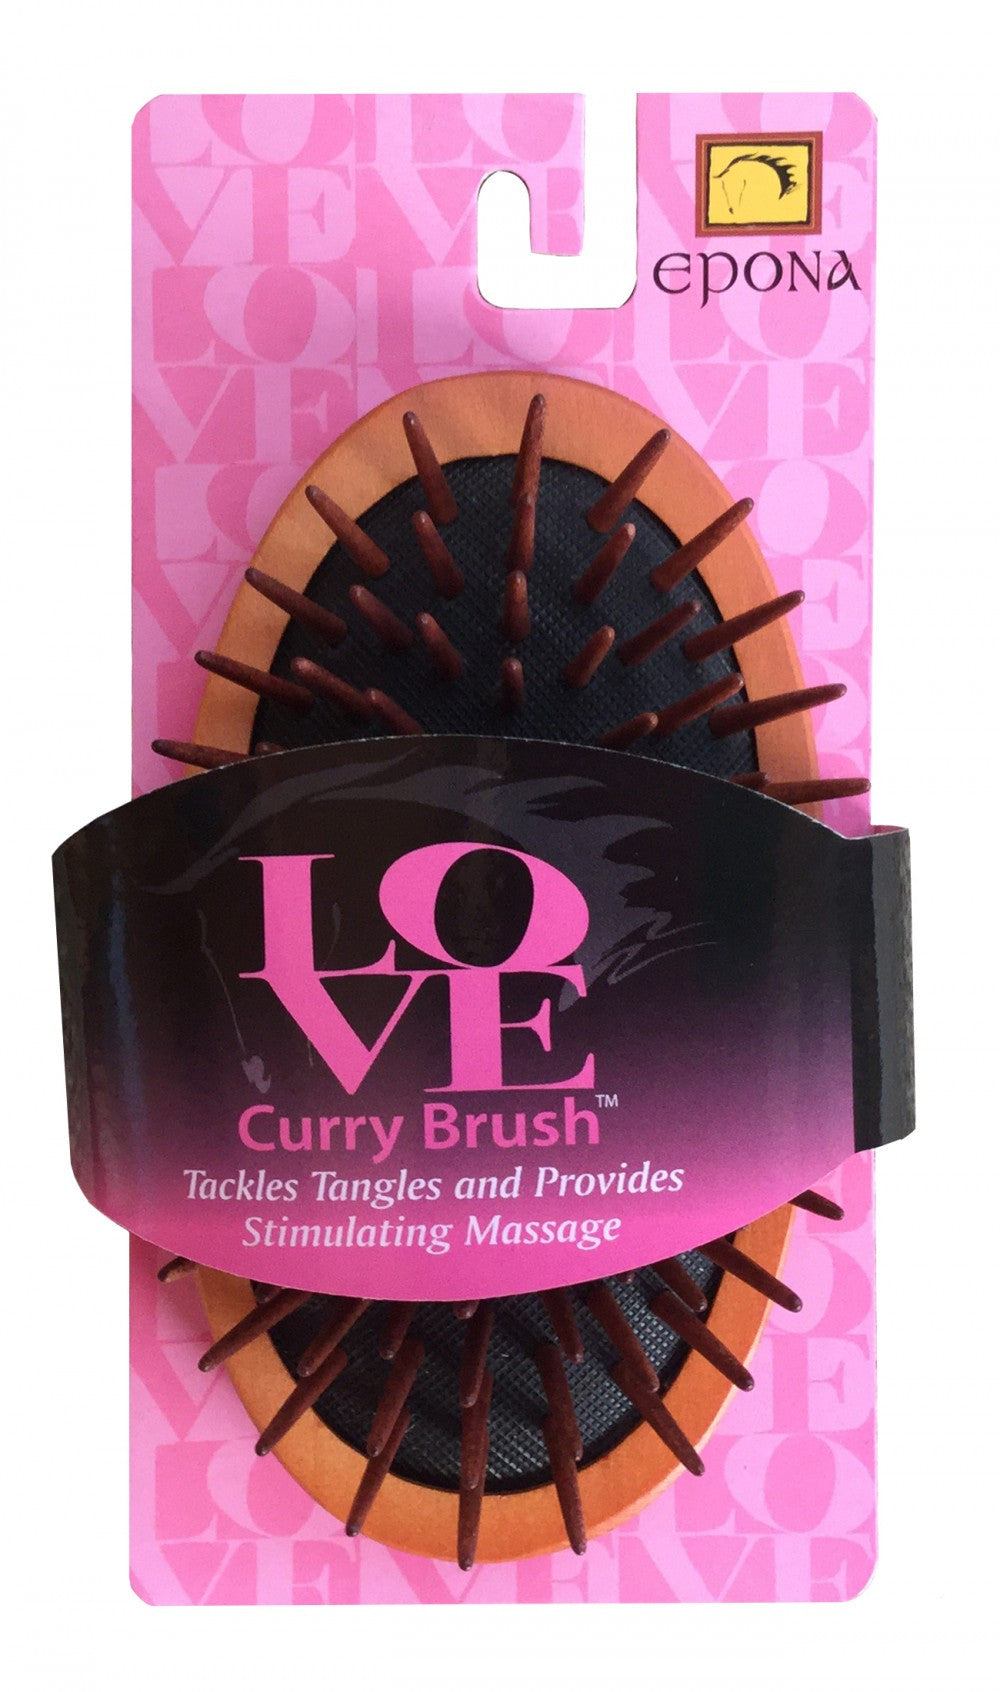 Epons Love Curry Brush - The Tack Shop of Lexington